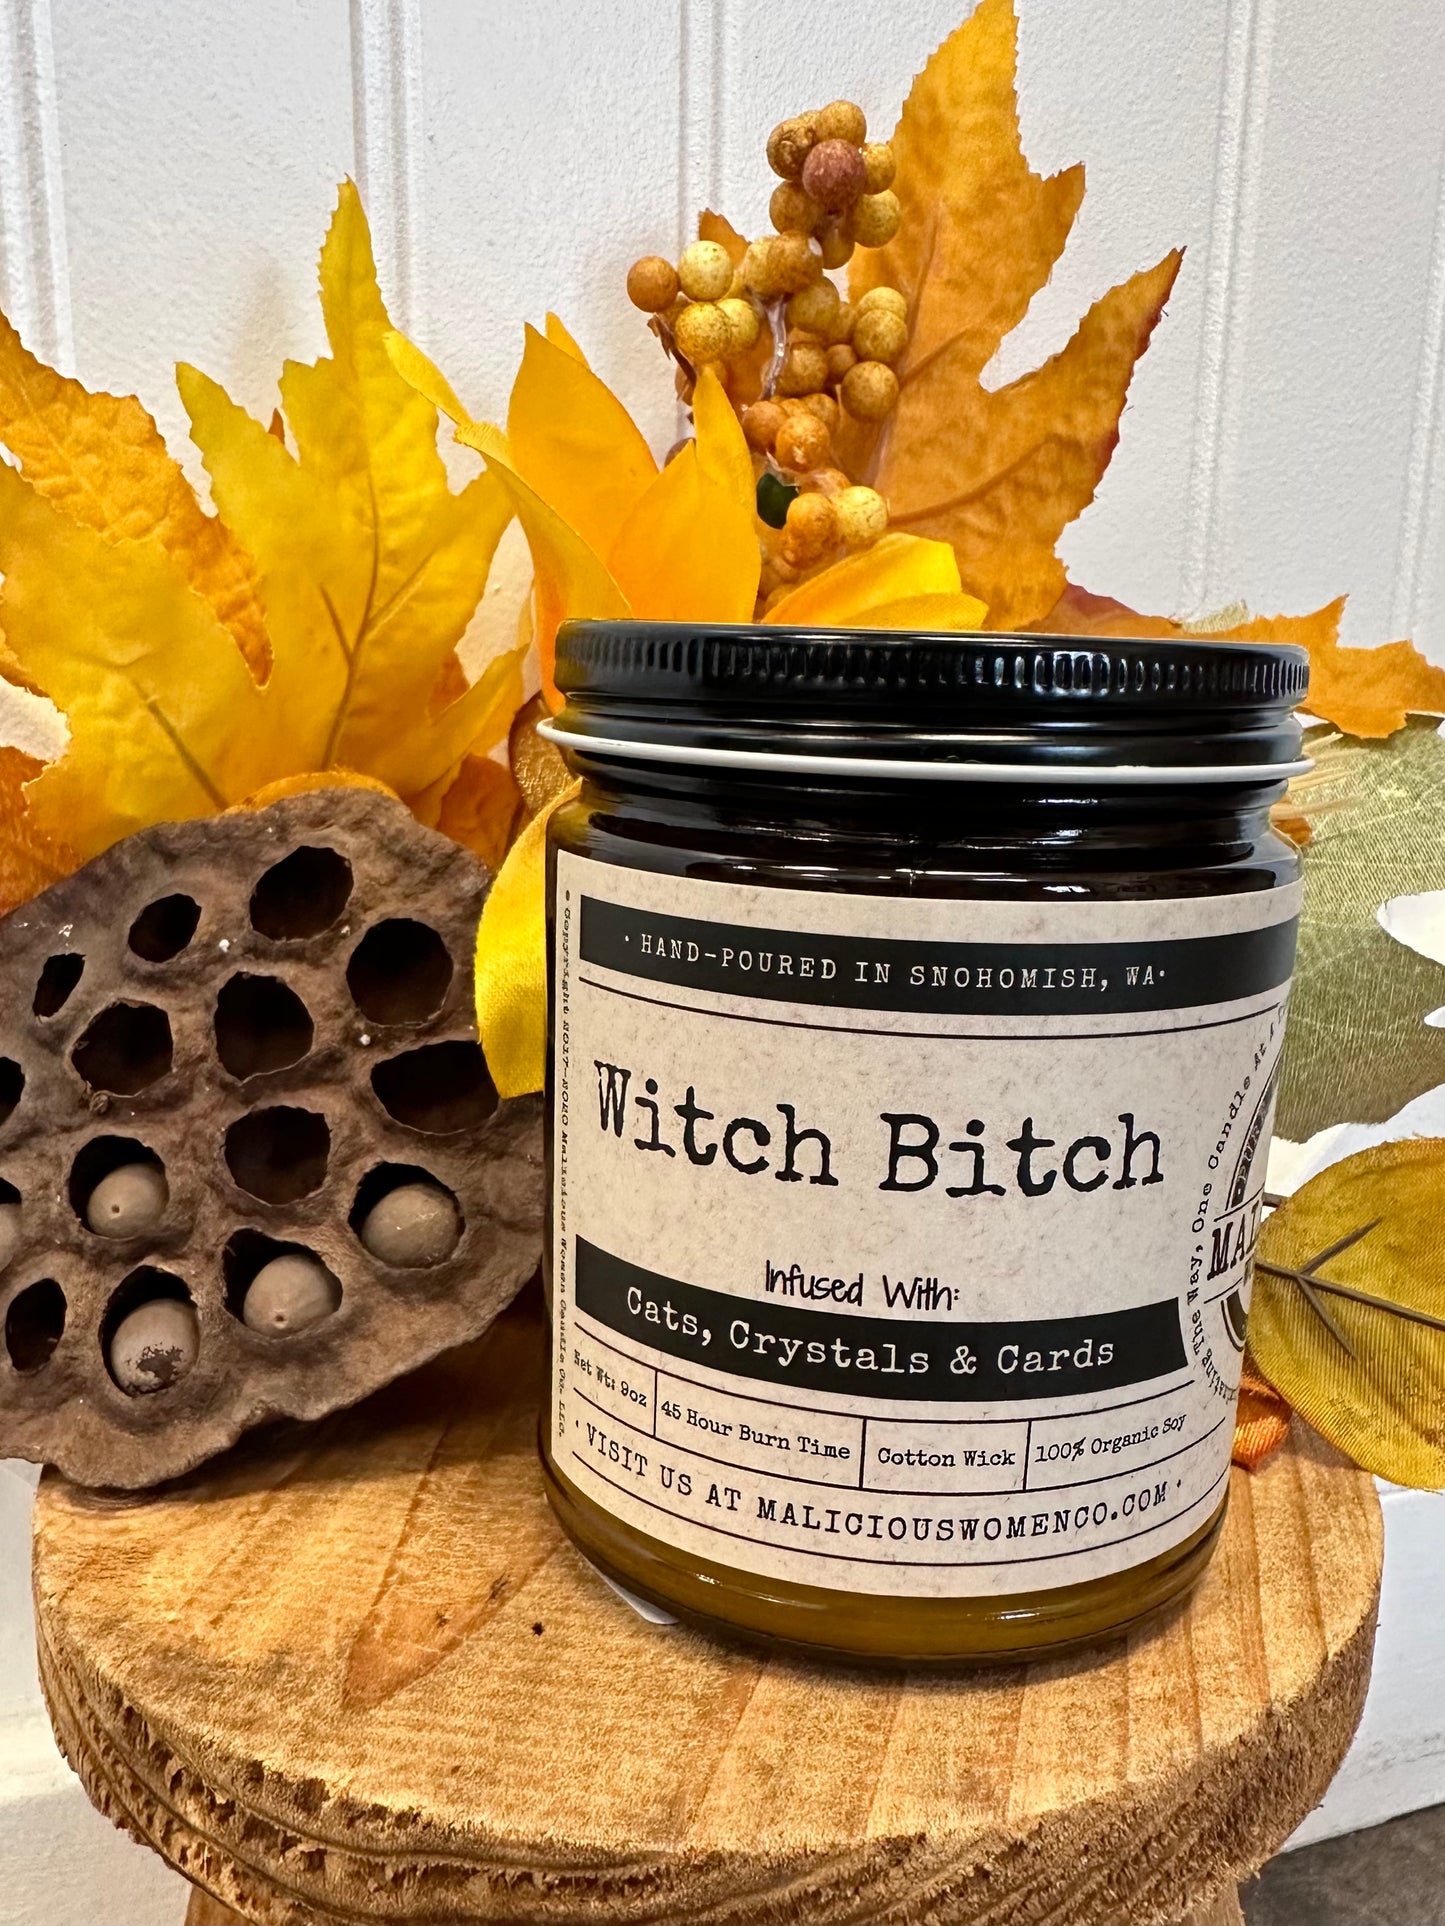 "Witch Bitch" Candle